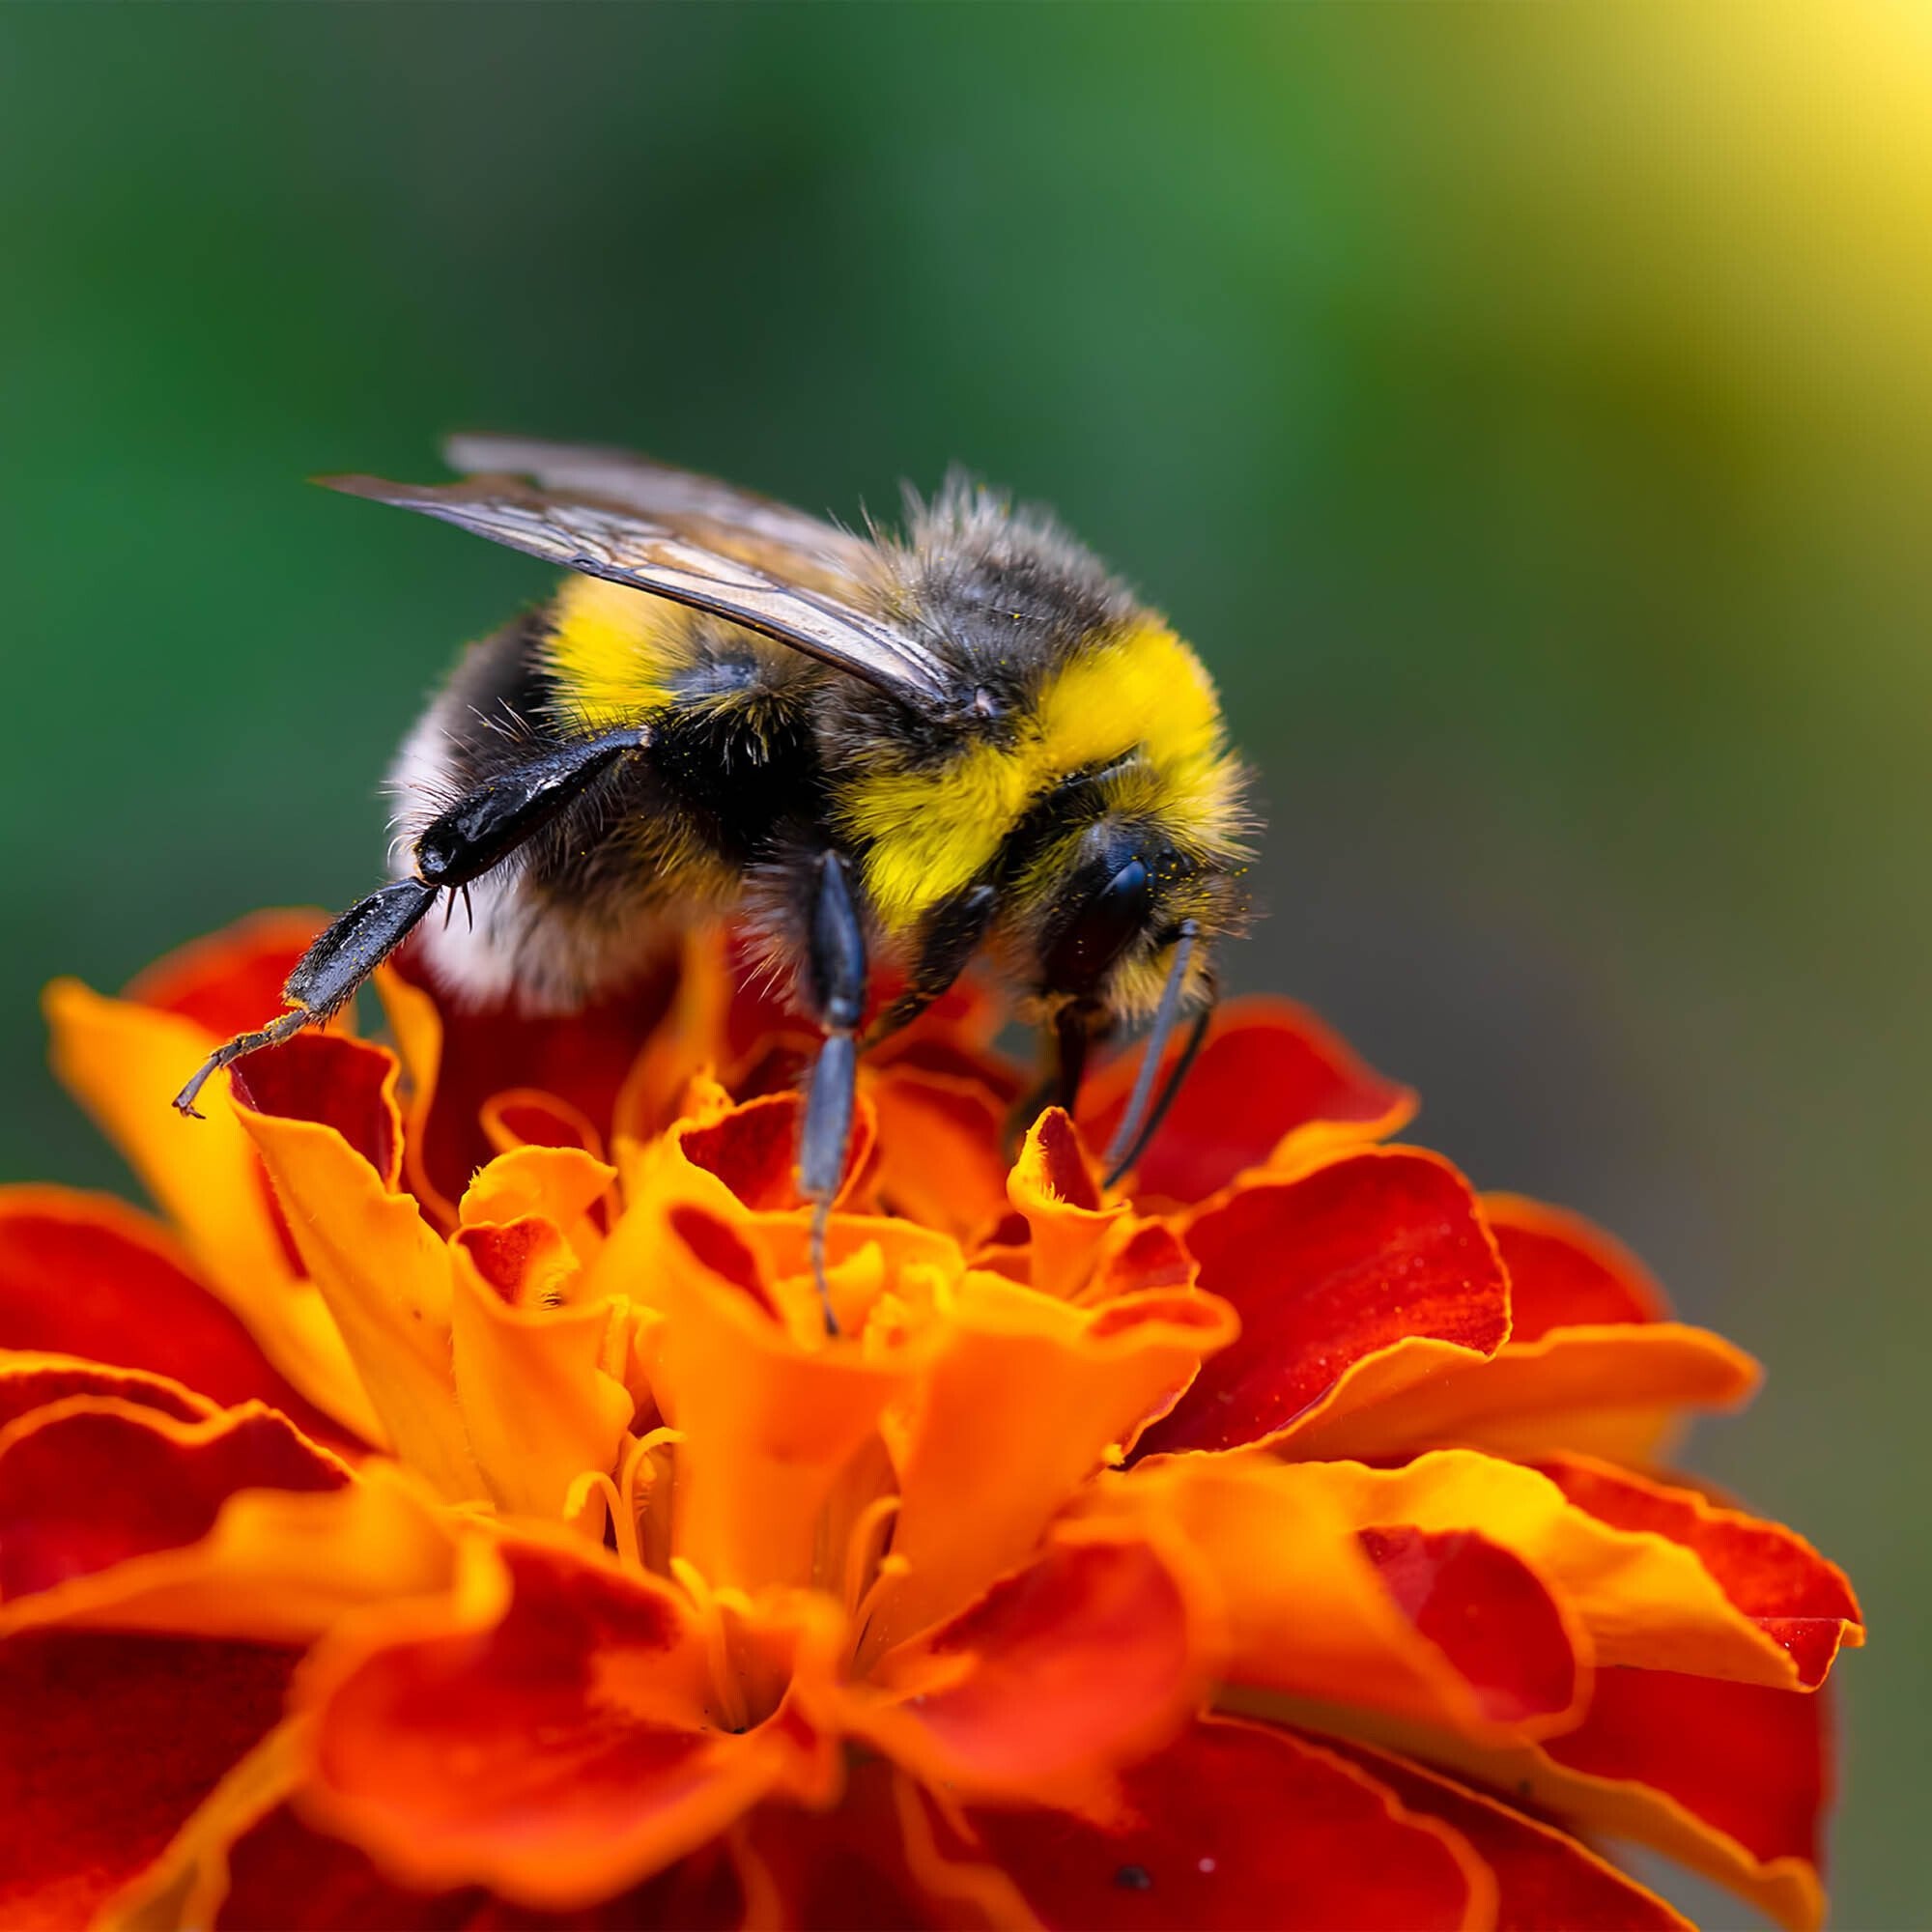 Plant Flowers to Save Bees & Other Natural Wildlife